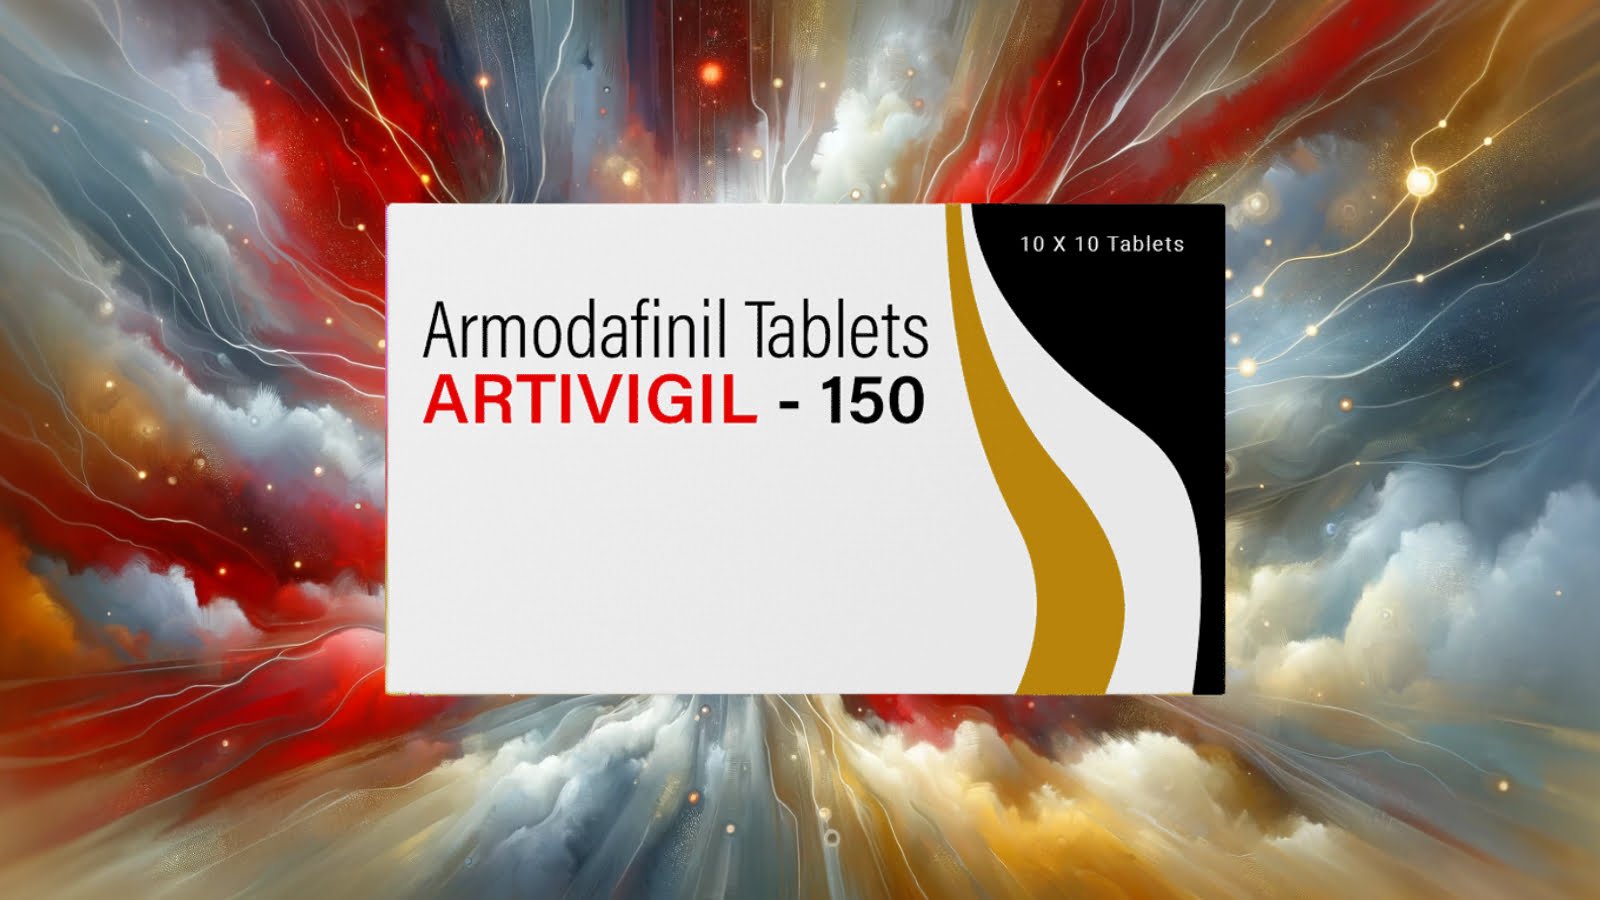 Comprehensive review of Artvigil's nootropic benefits, uses, dosage, and side effects.